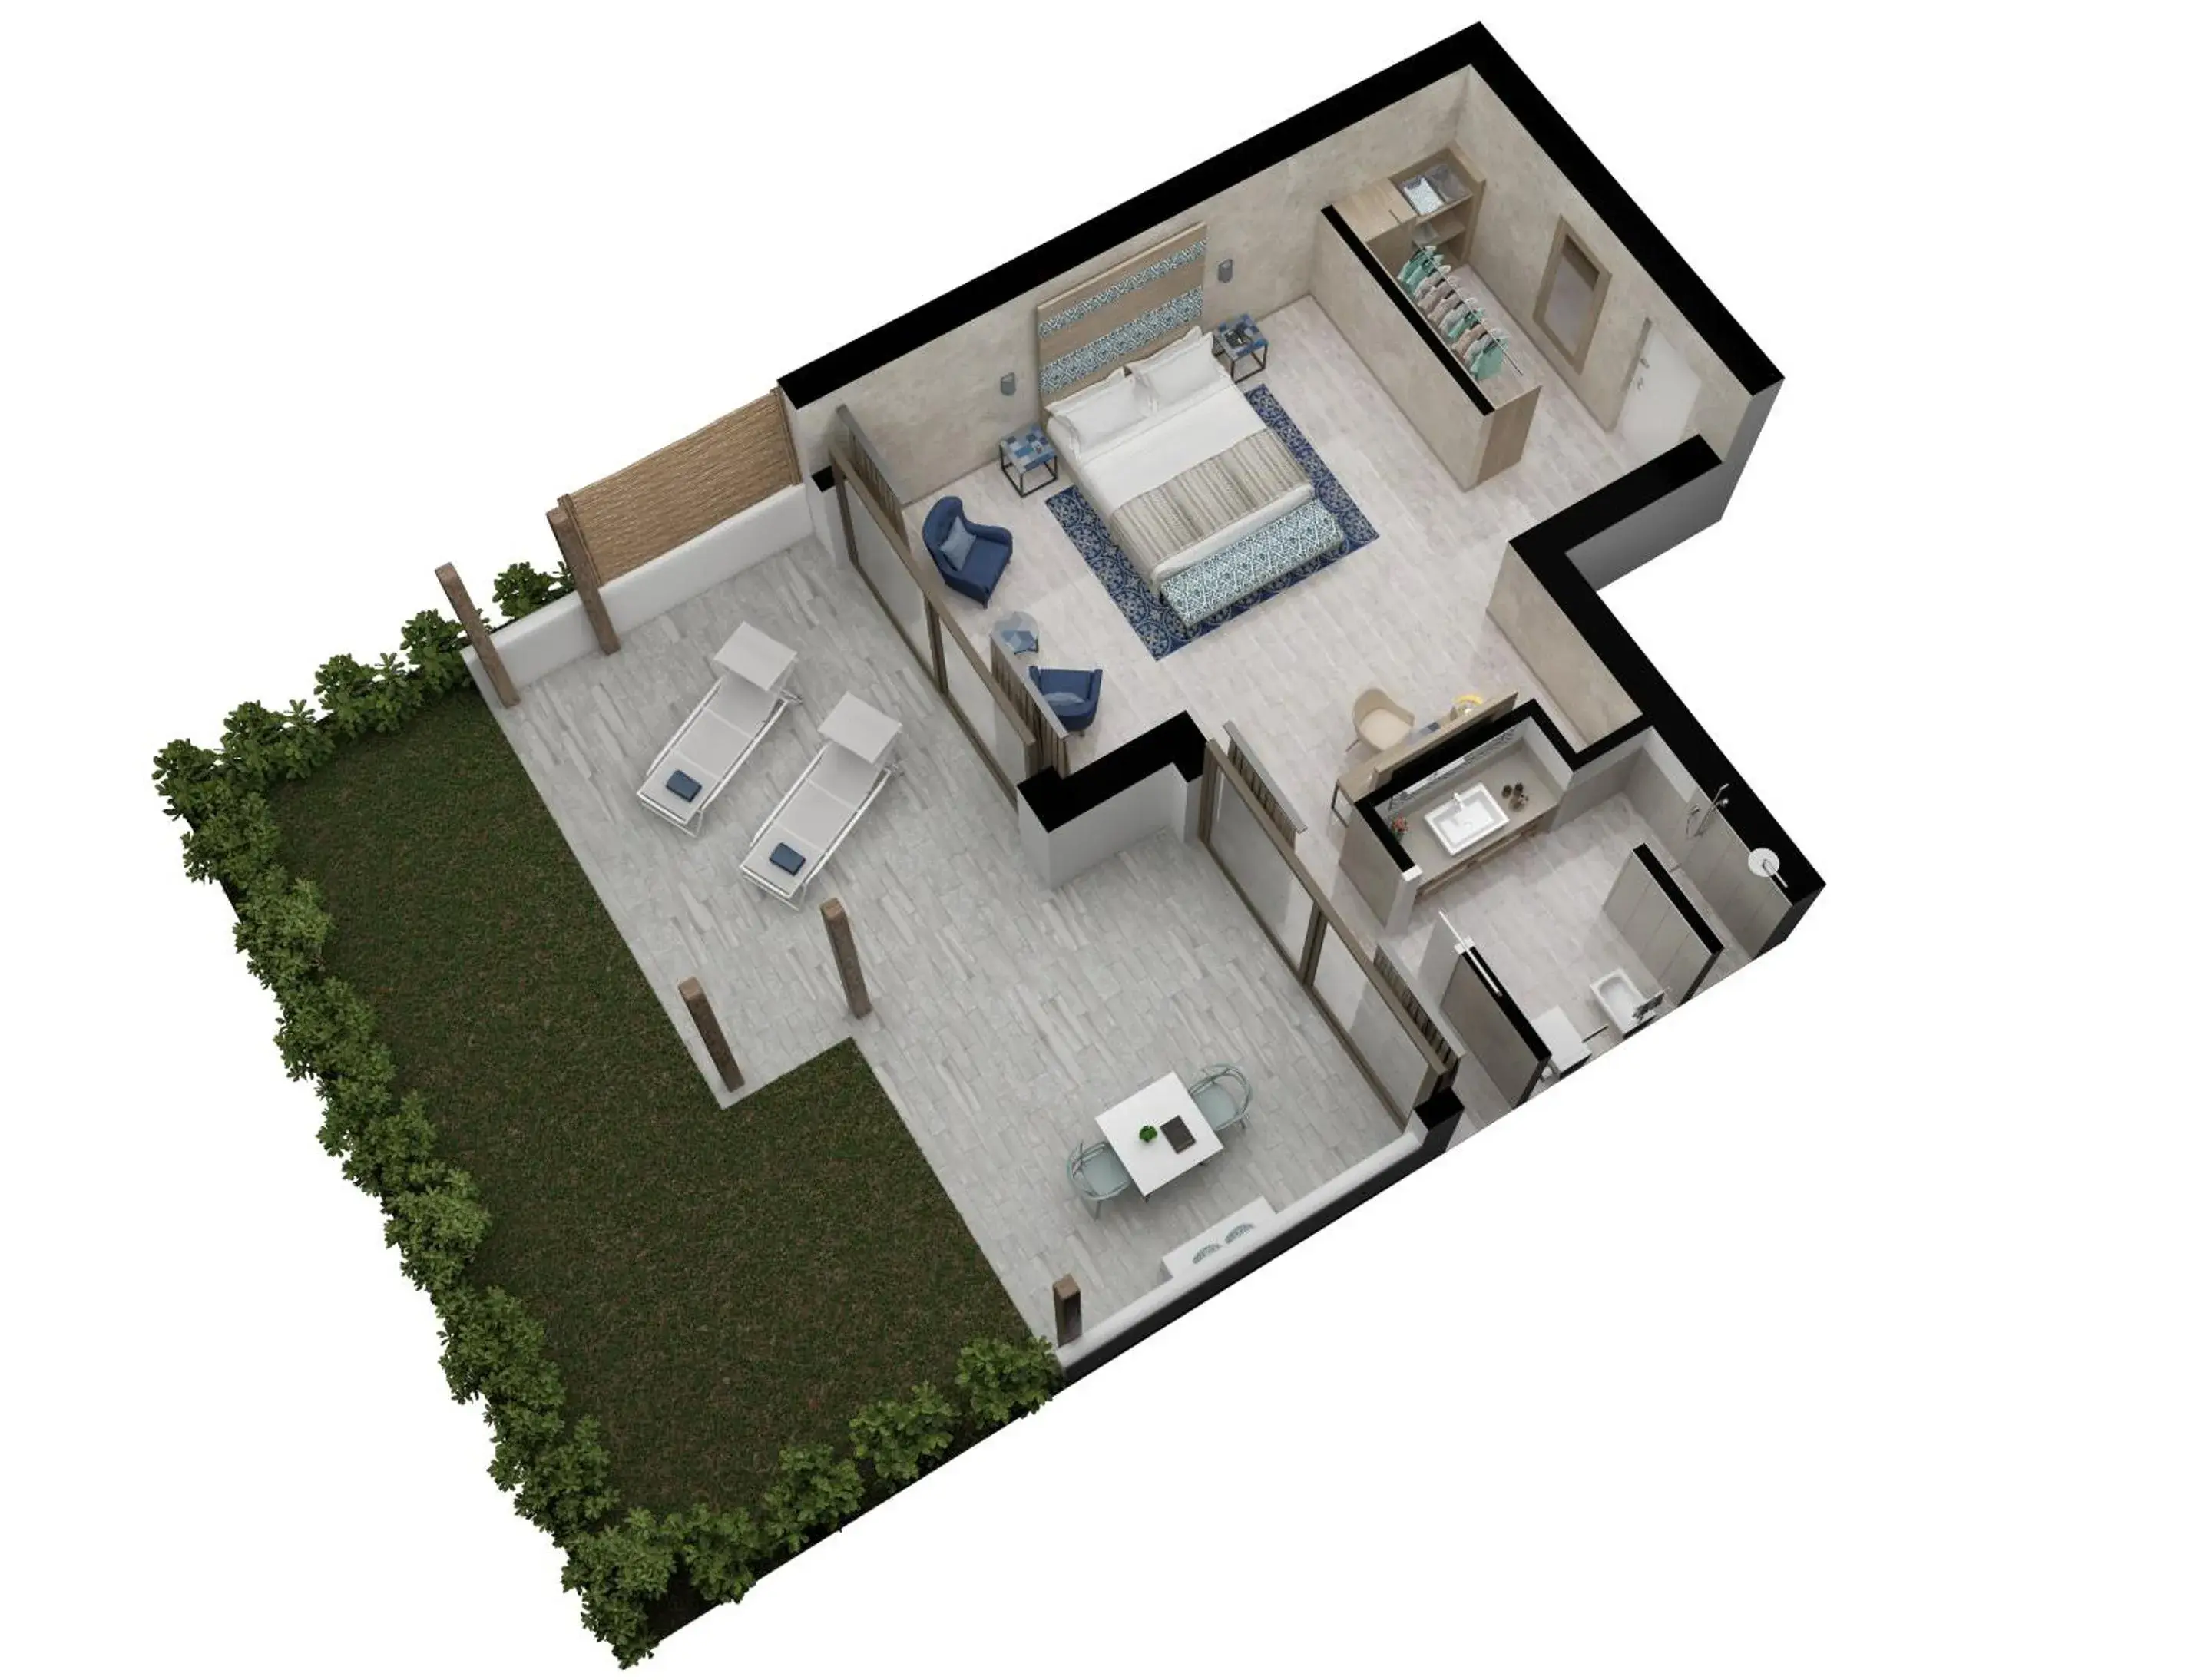 Floor Plan in Baglioni Resort Sardinia - The Leading Hotels of the World